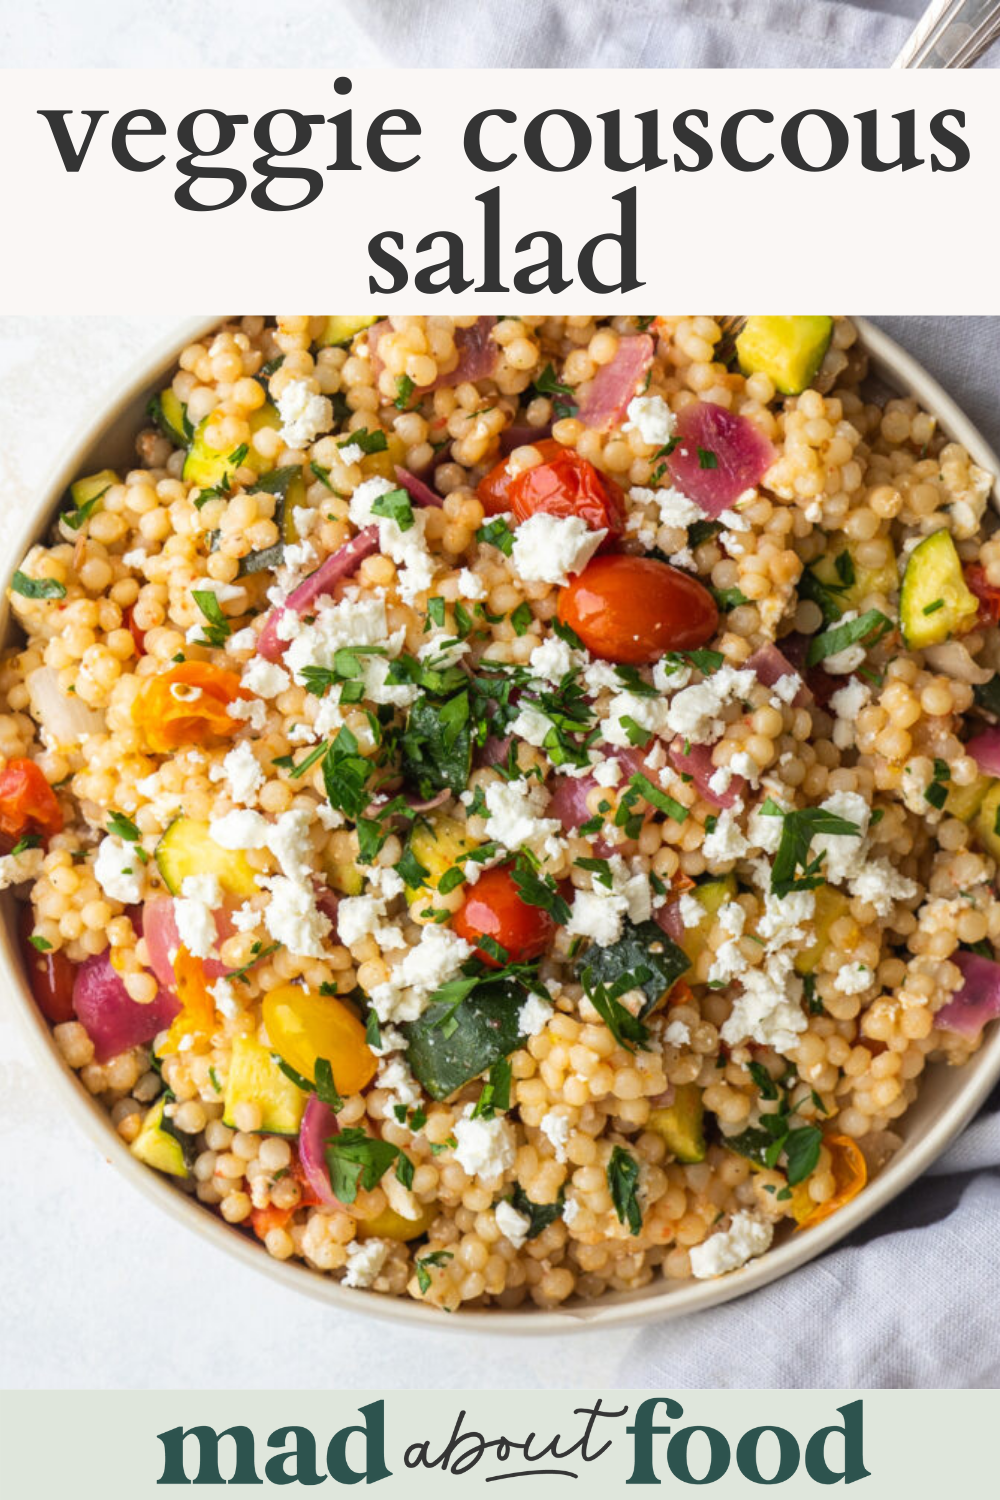 Image for pinning Veggie Couscous Salad recipe on Pinterest